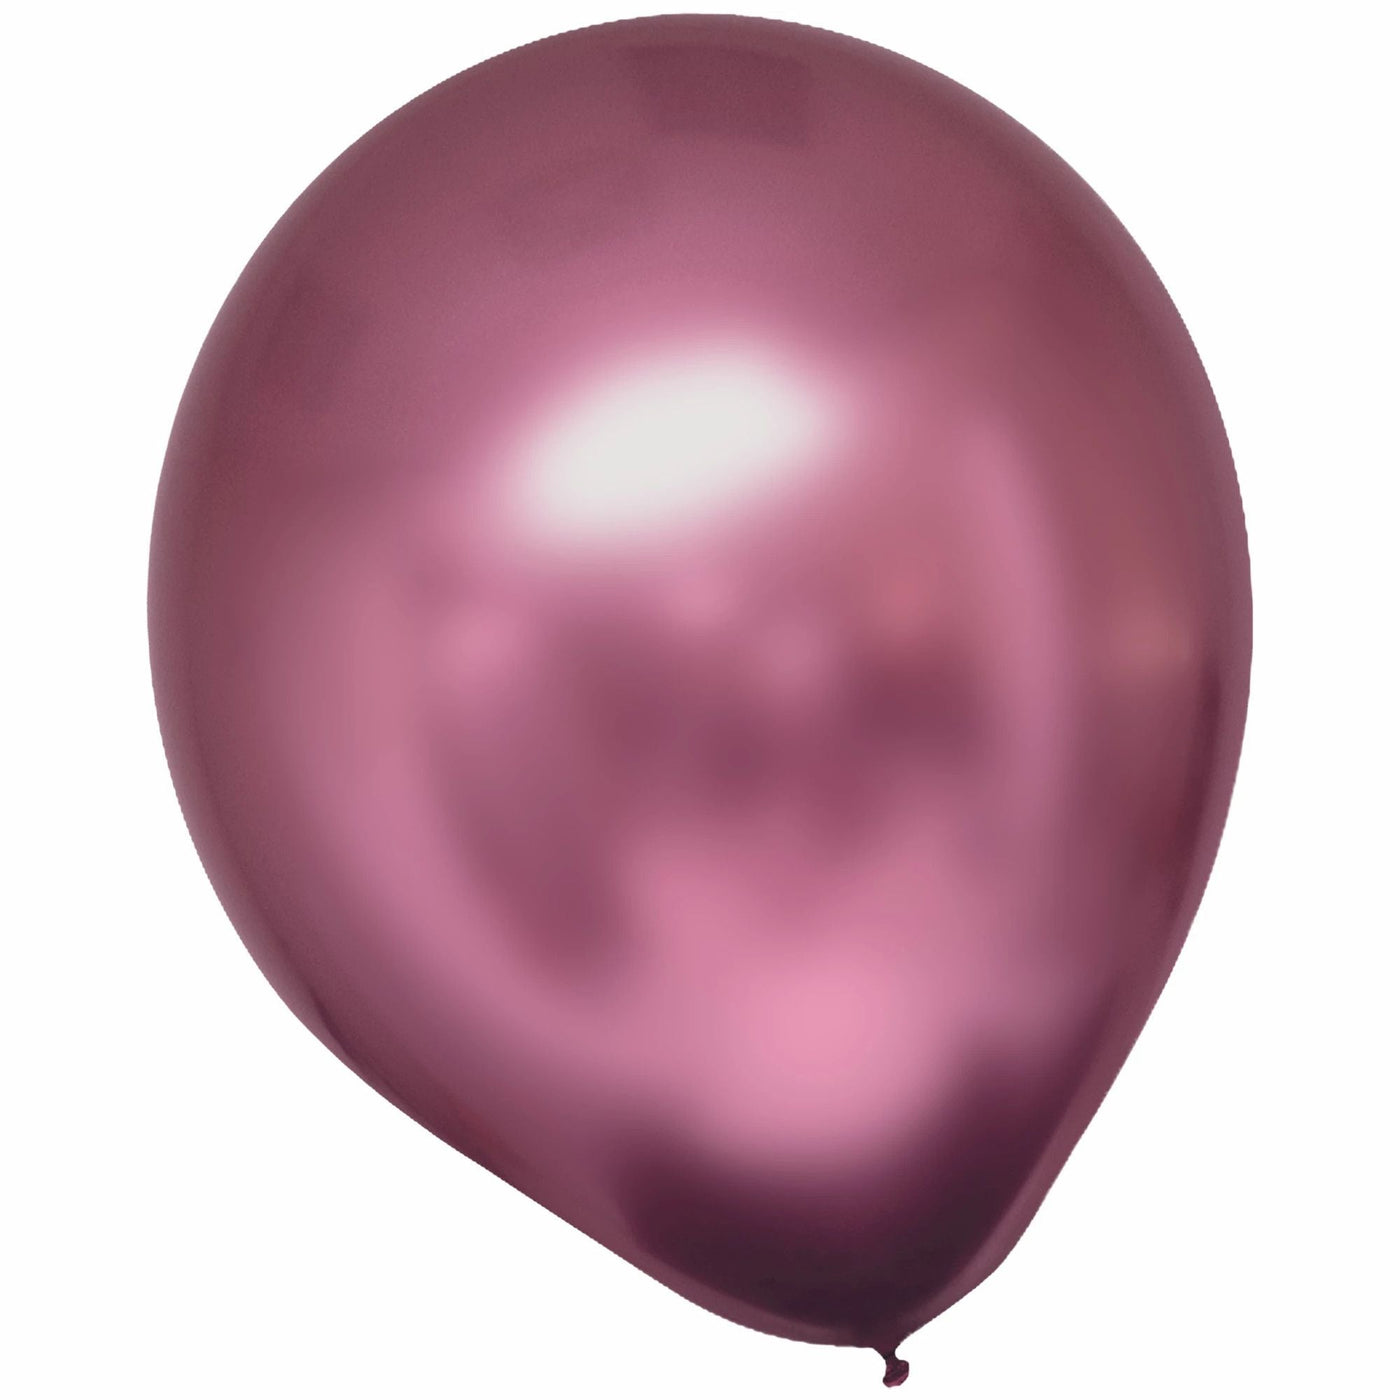 Flamingo Chome Latex Balloons 100ct - JJ's Party House